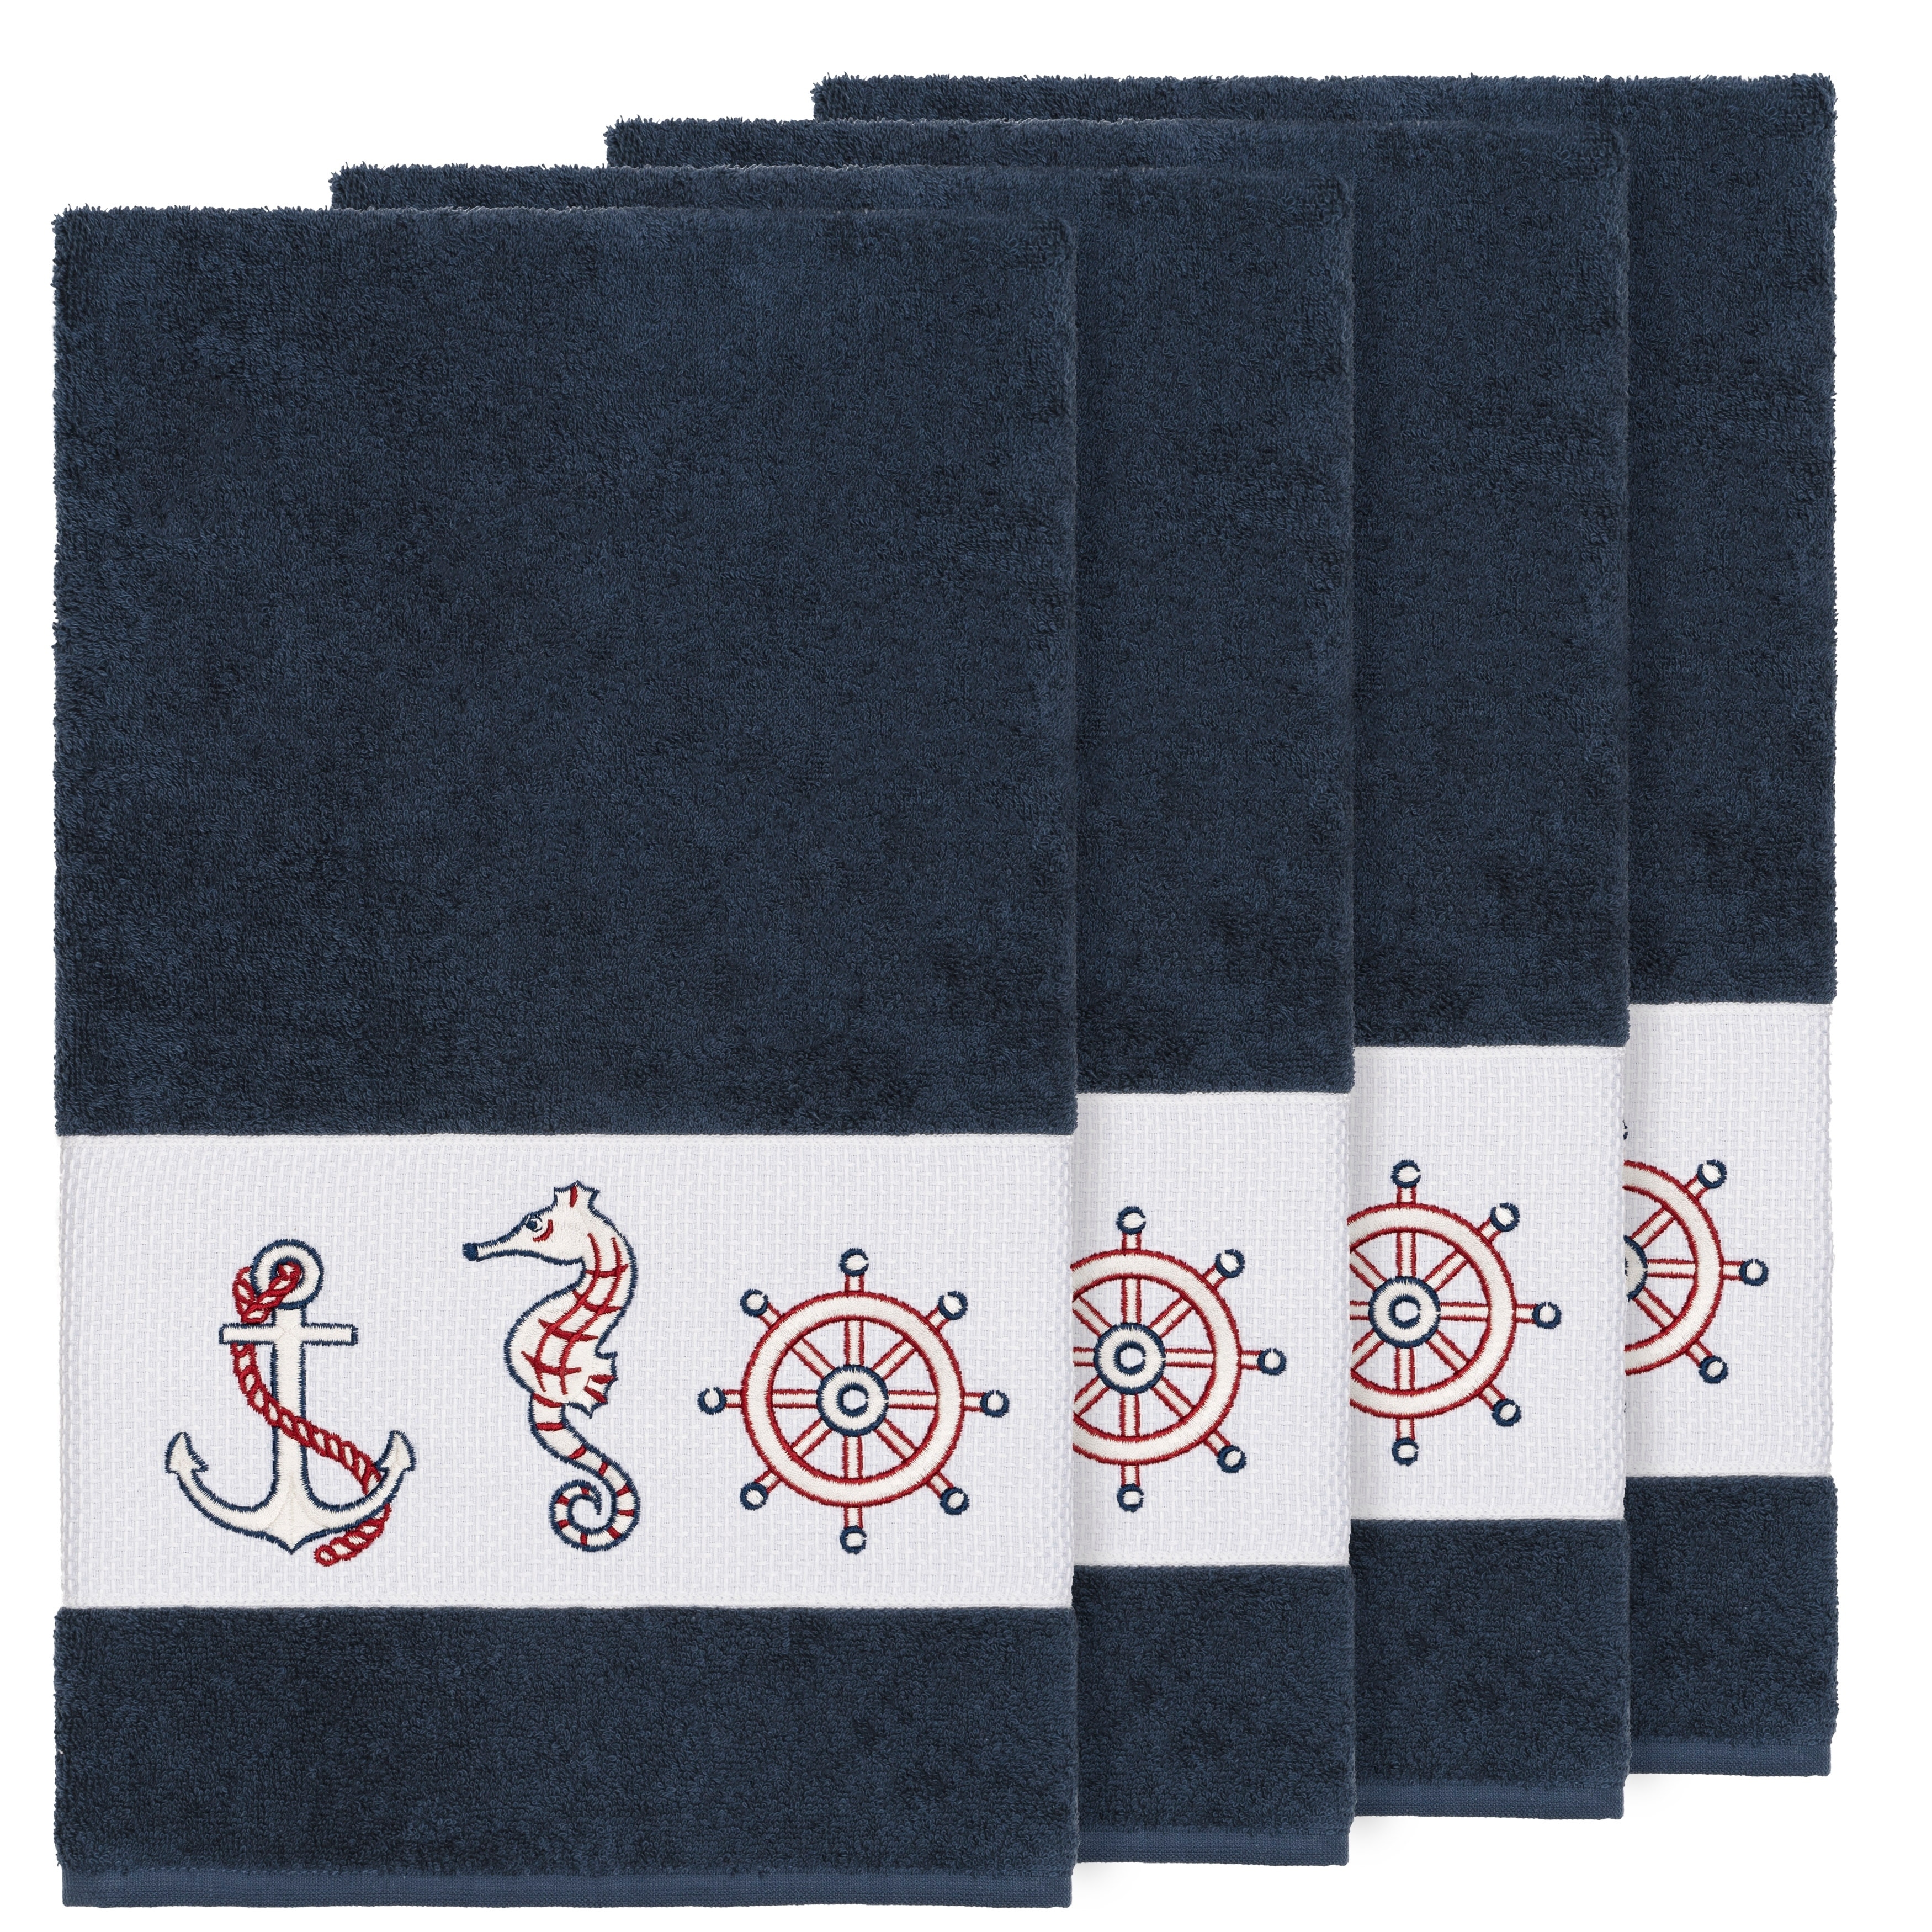 https://ak1.ostkcdn.com/images/products/22355586/Authentic-Hotel-and-Spa-Turkish-Cotton-Nautical-Embroidered-Midnight-Blue-4-piece-Bath-Towel-Set-5e468c52-abb0-4a68-8c08-0115e36d0fa1.jpg